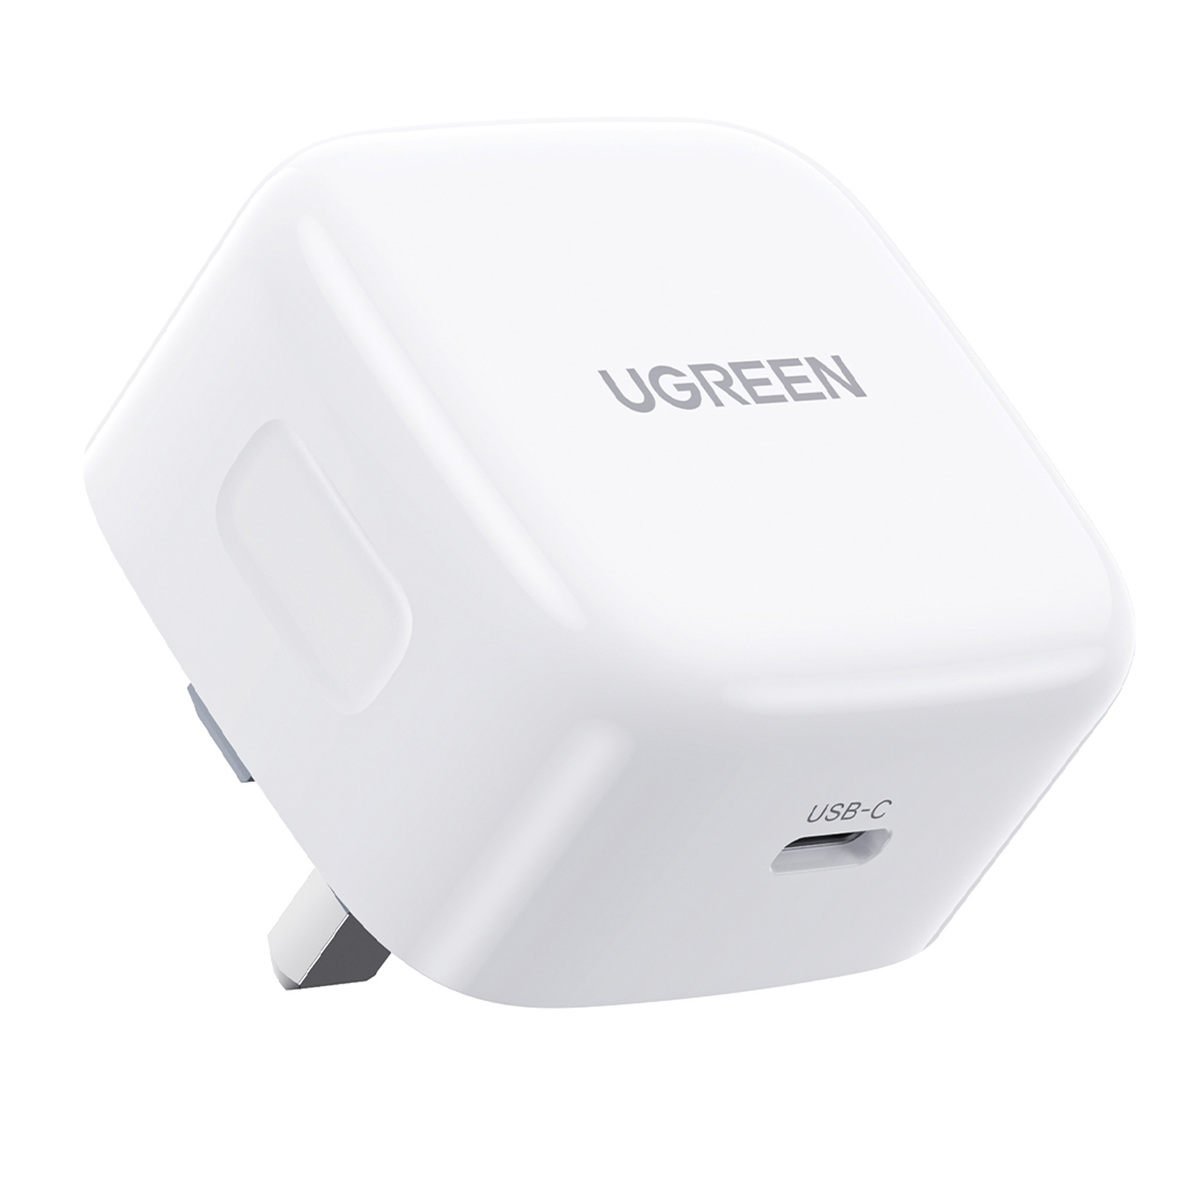 Ugreen PD USB-C Wall Charger, 30 W, White, 70197